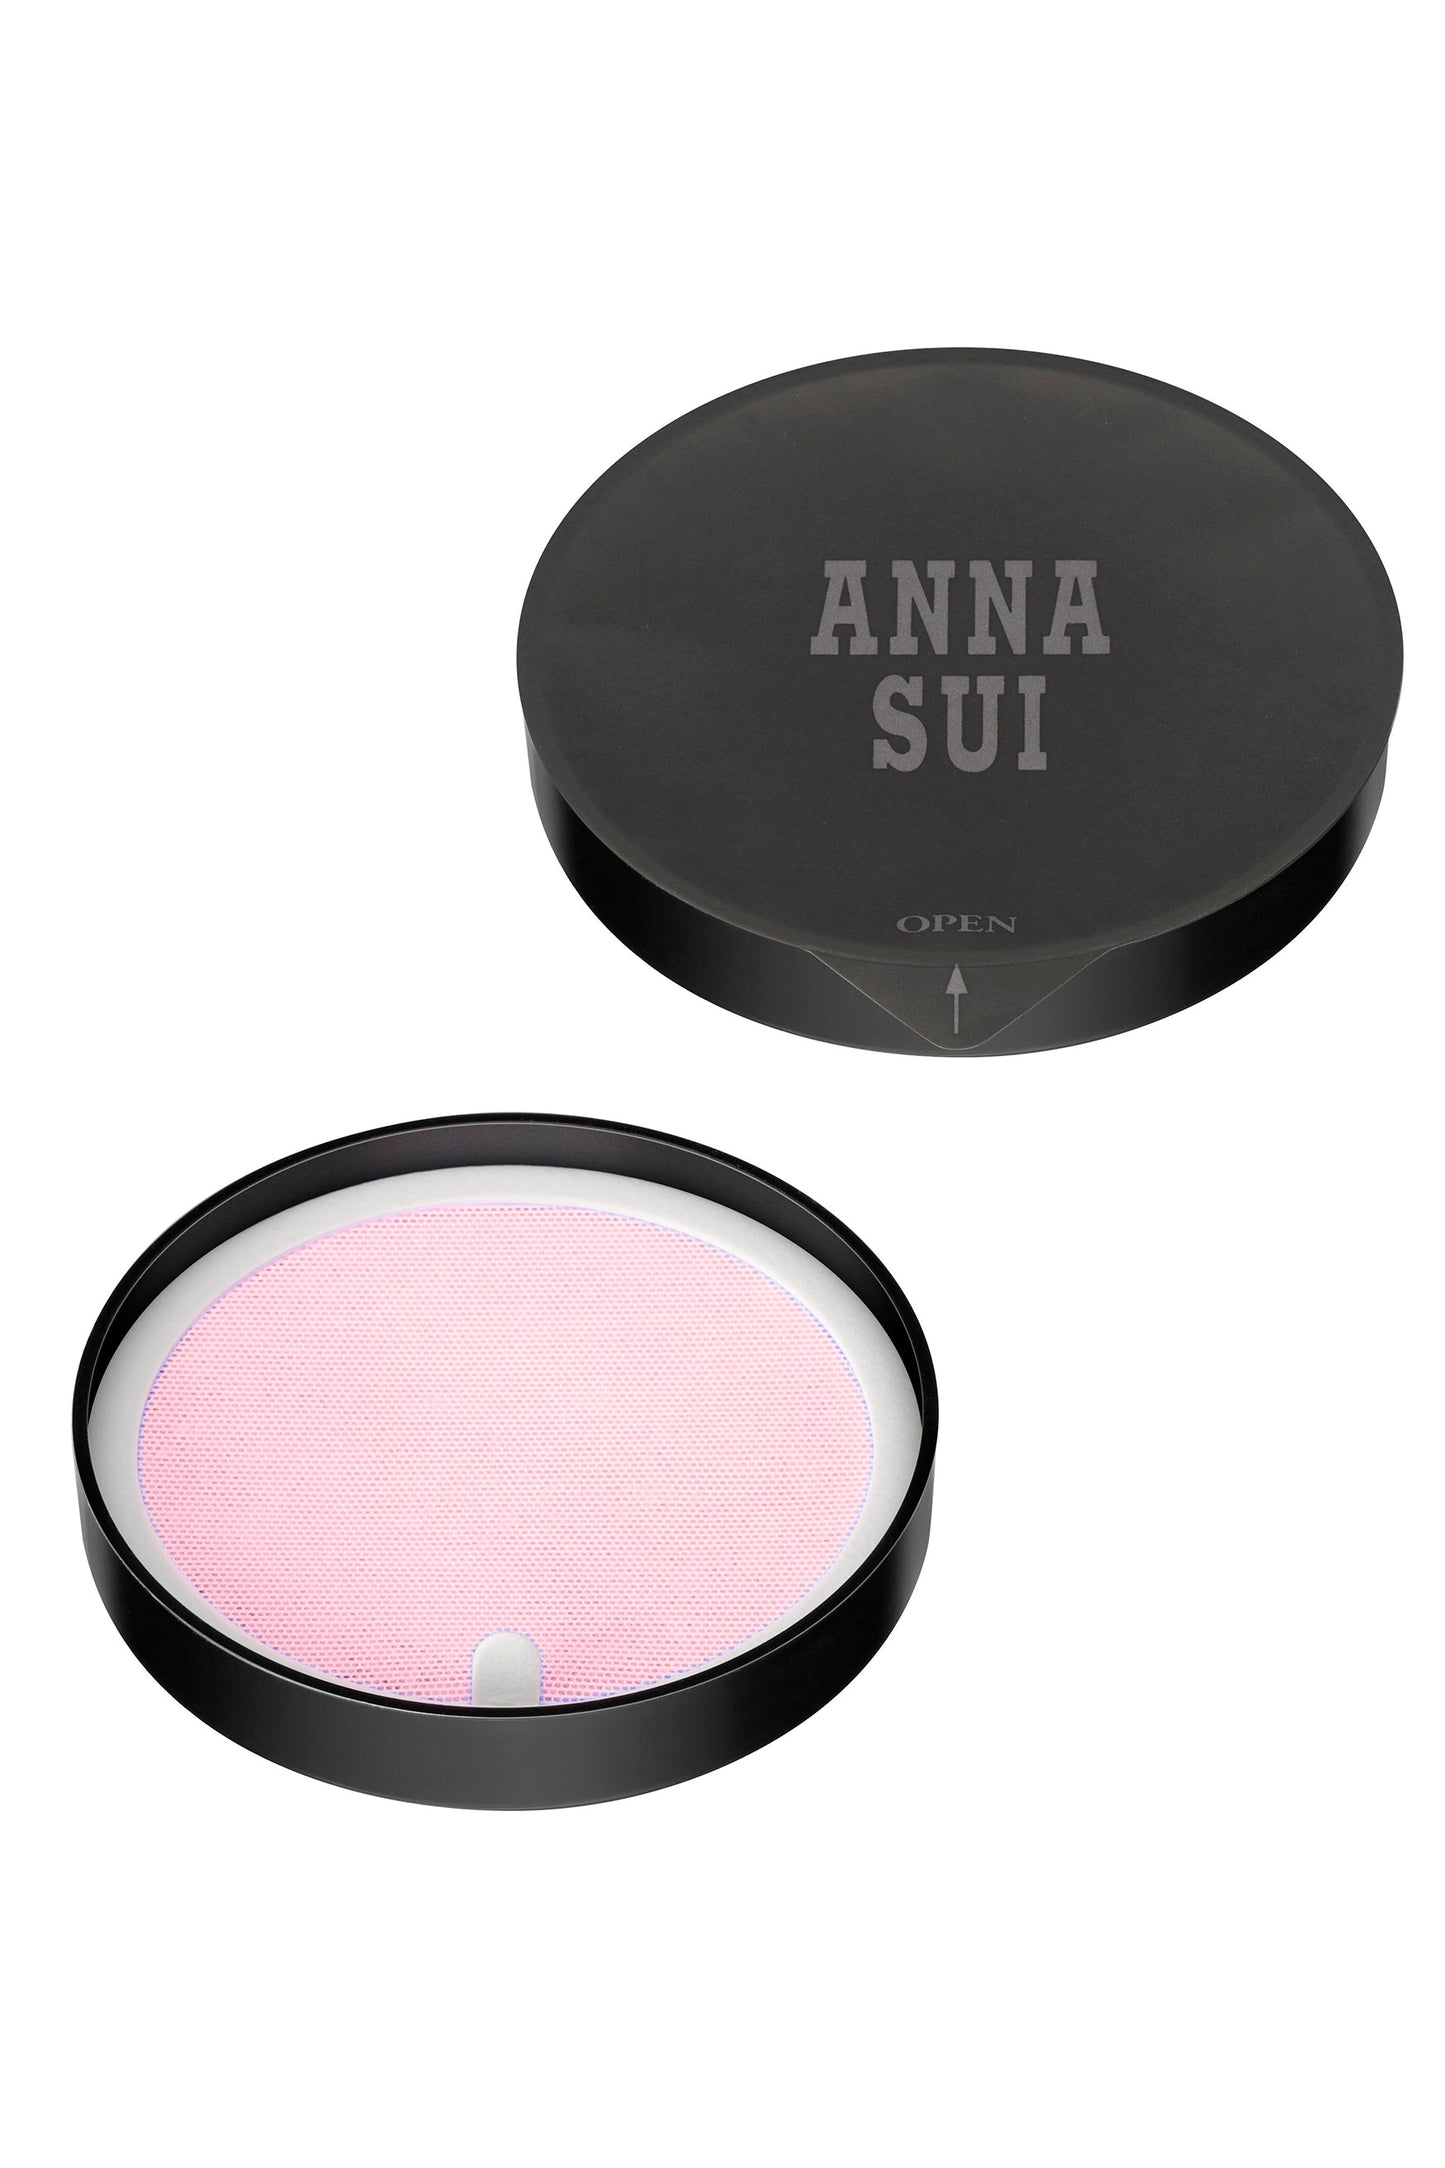 Black round container, Anna Sui label on top, with an open sign, loose Face Powder #300